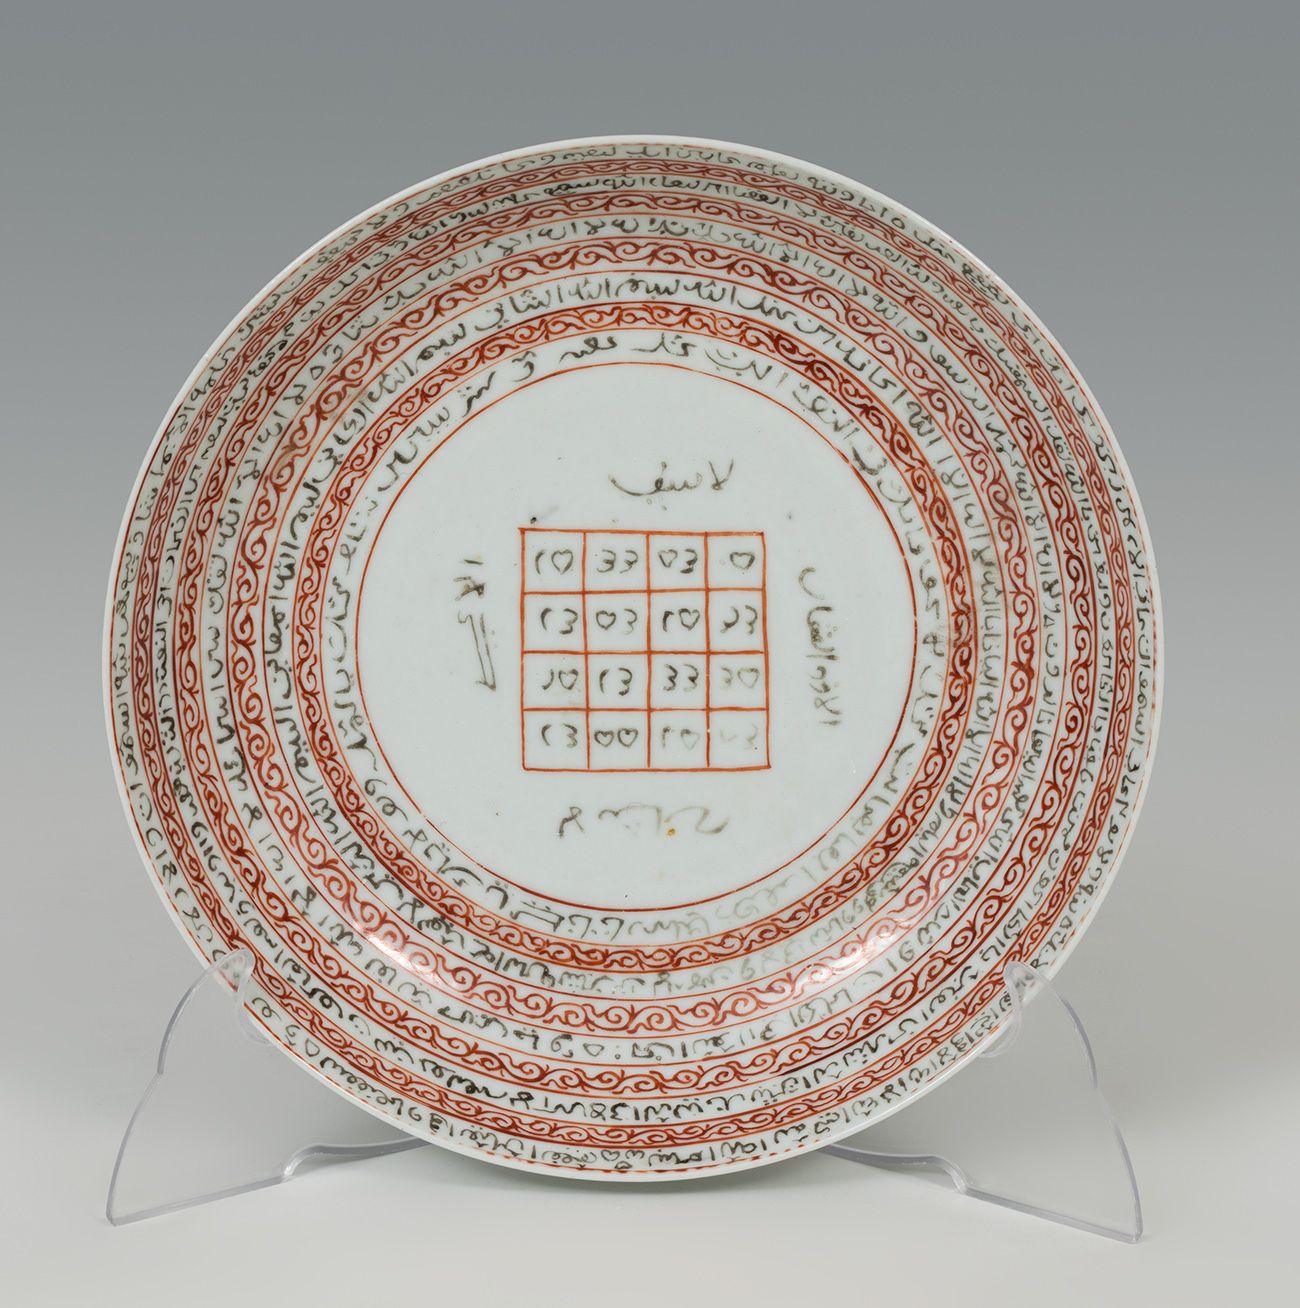 Null Dish; China, Quing Dynasty, 1644-1911.
Porcelain with enamelled decoration.&hellip;